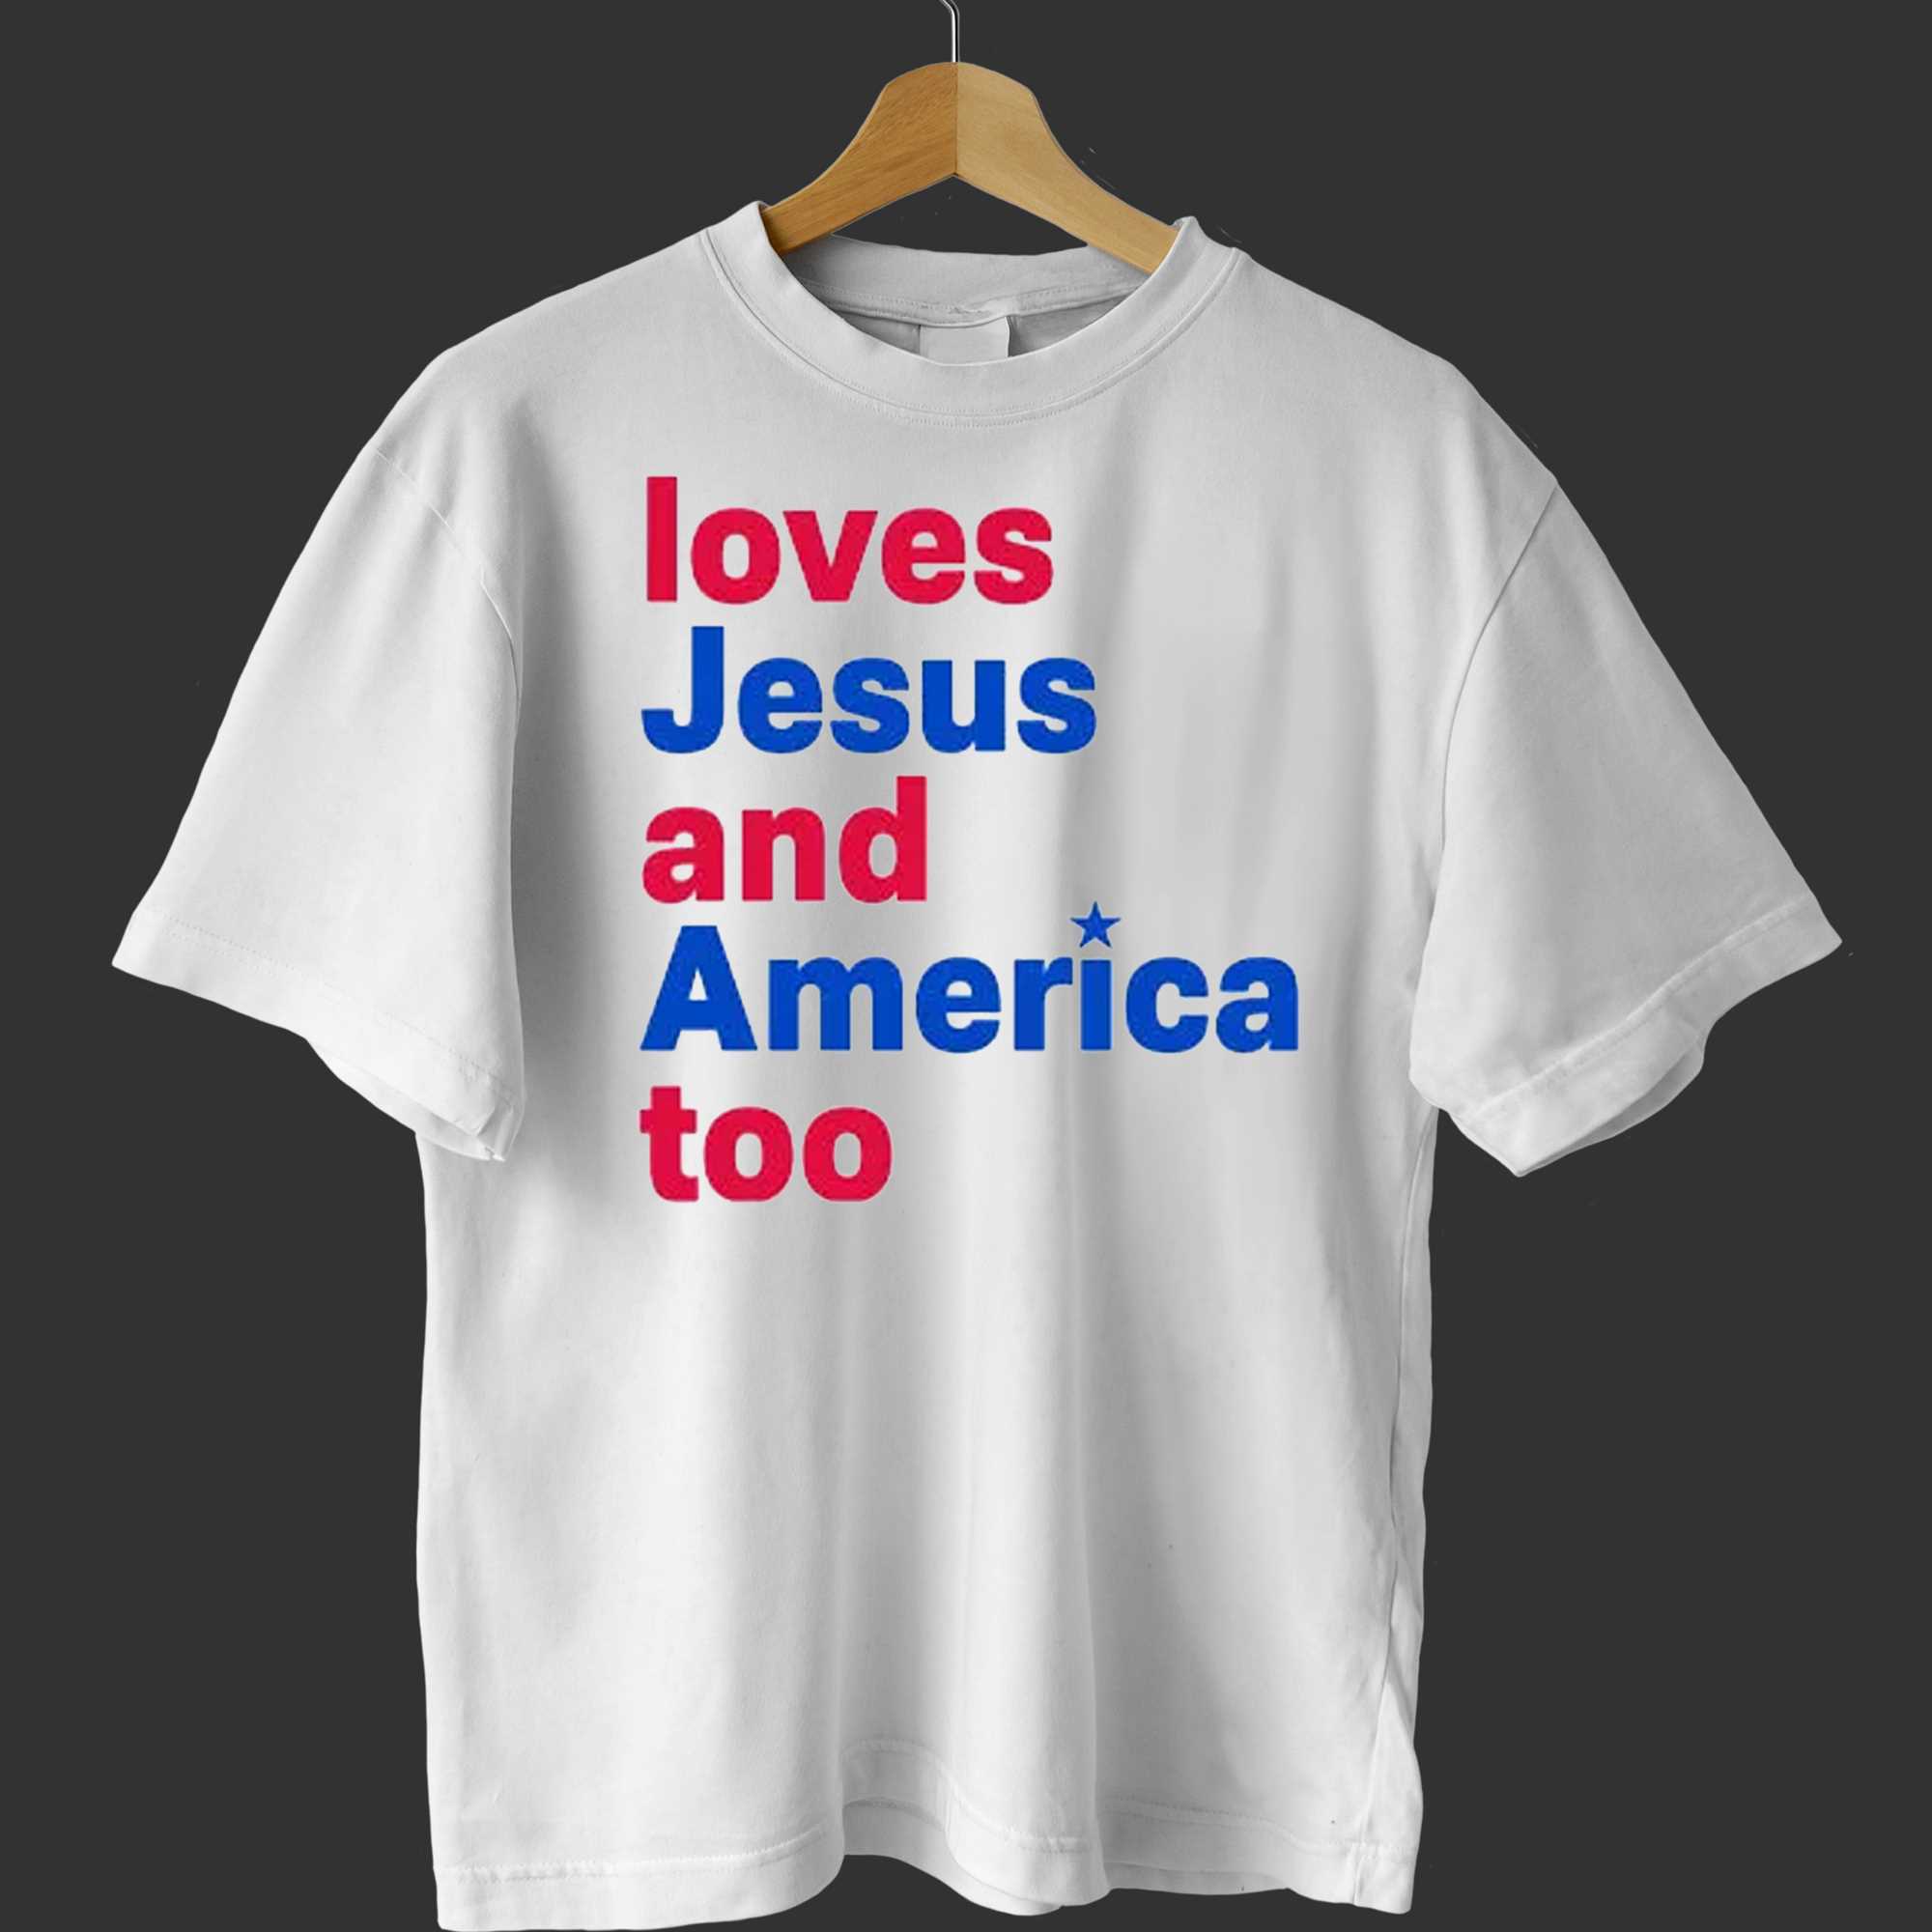 loves jesus and america too shirt 1 1